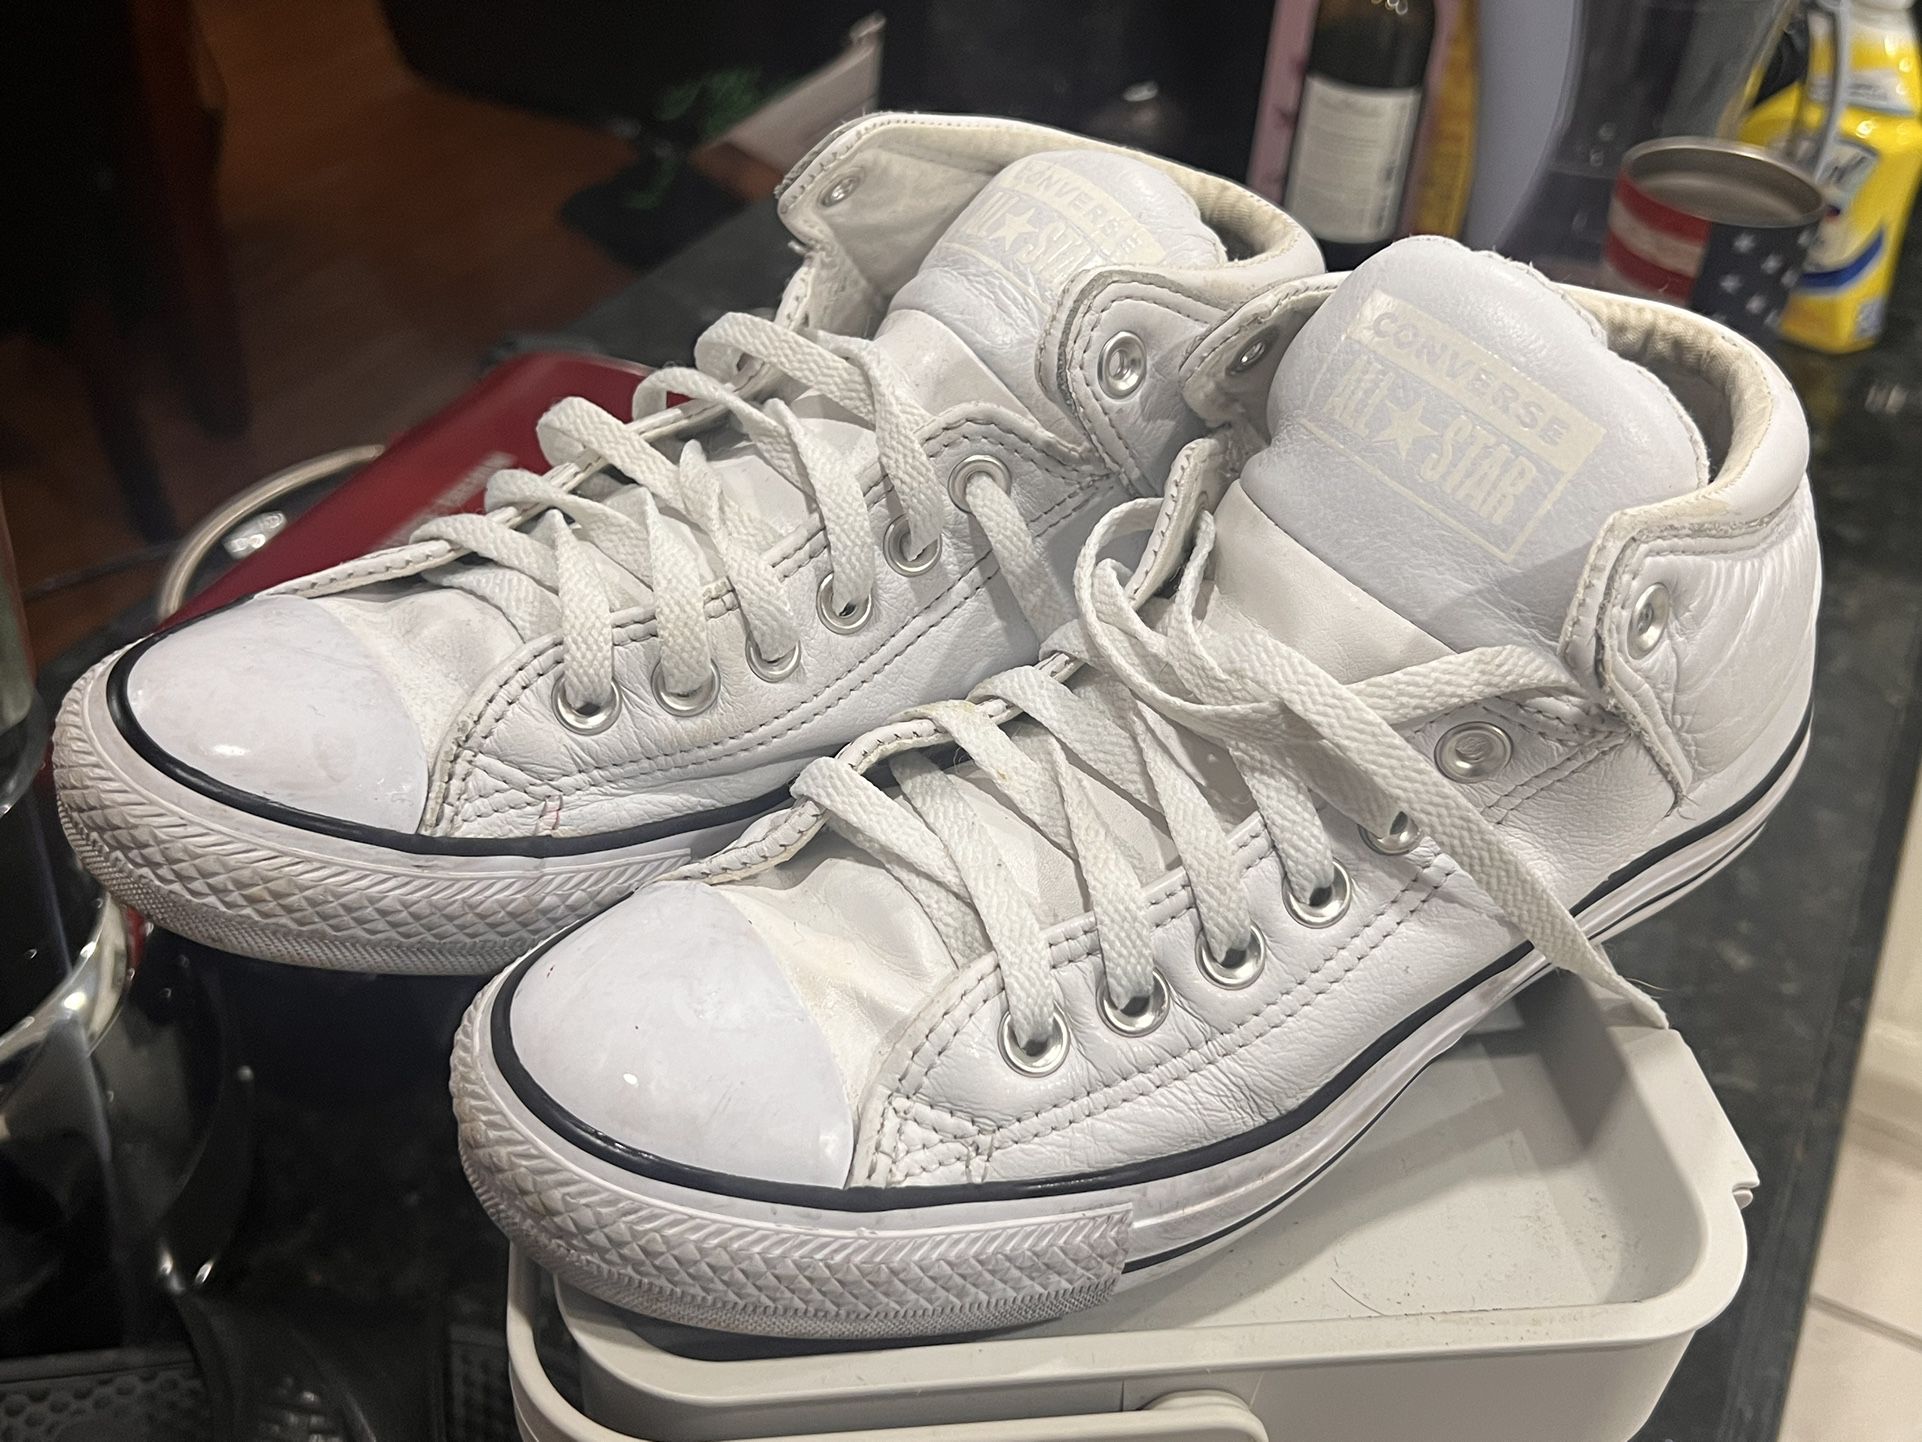 Converse All Star ‘s. Used. Size 7 Men’s 